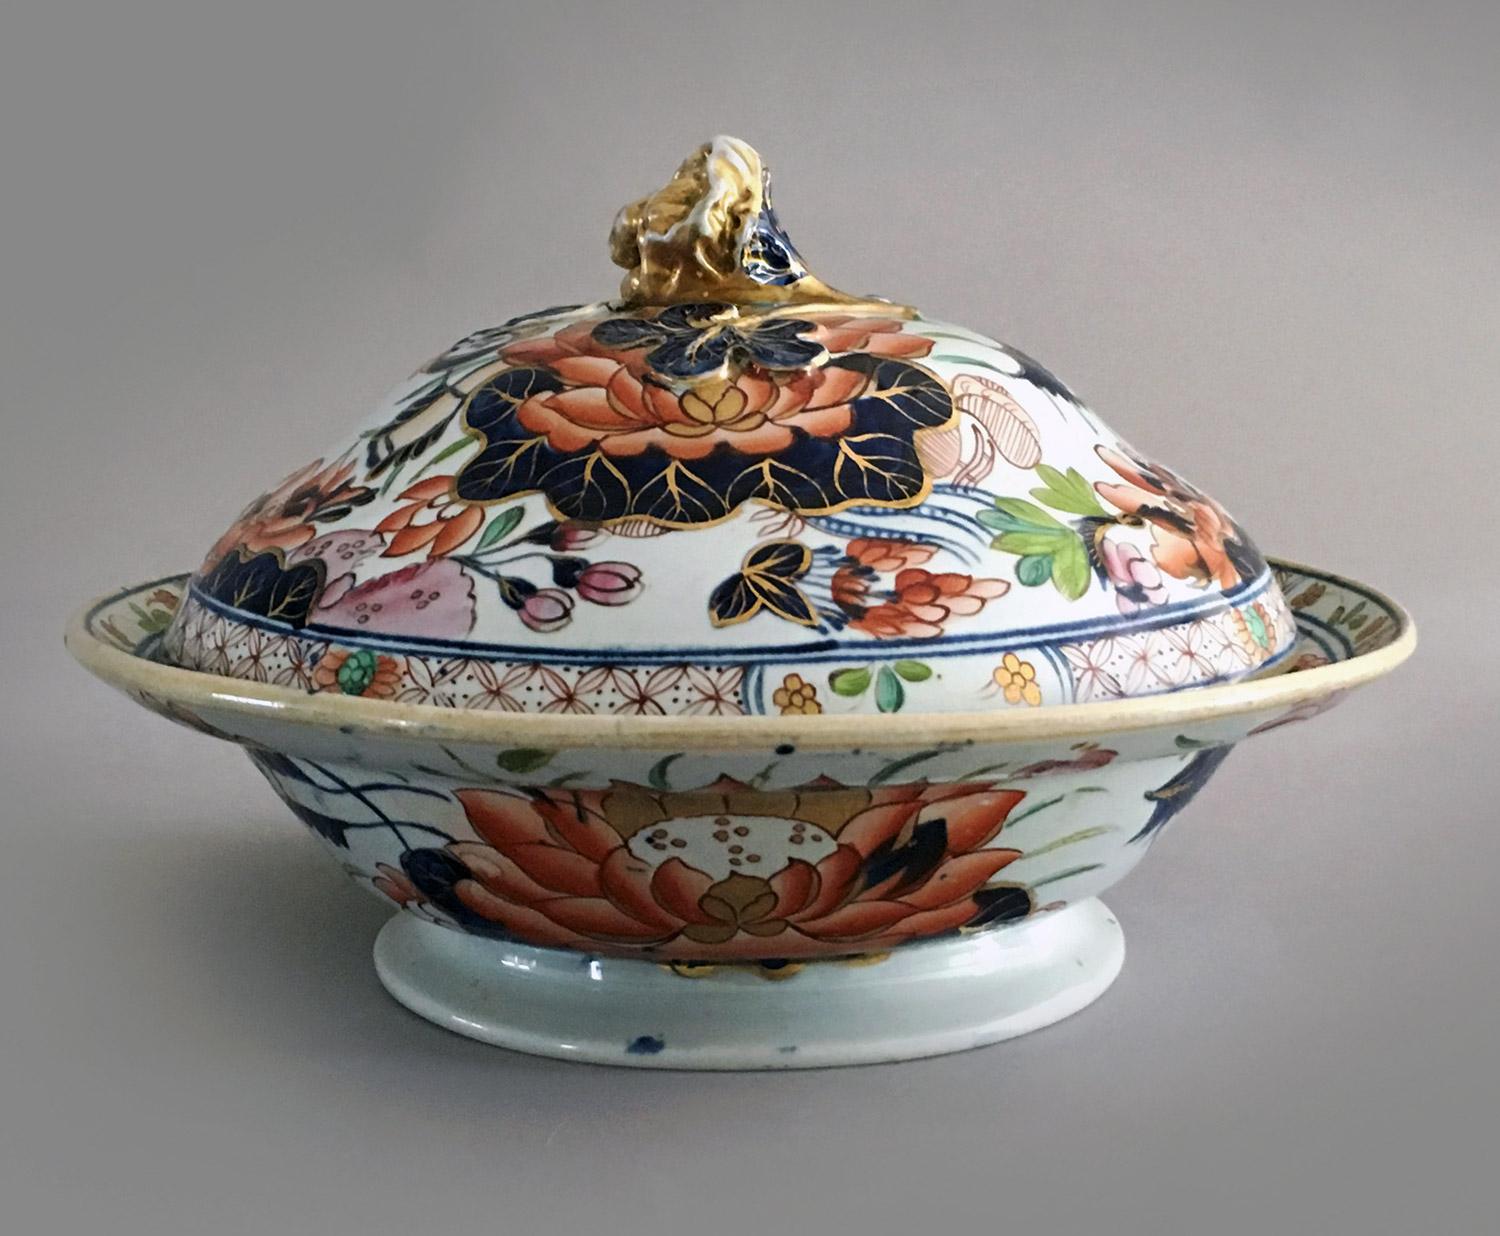 Antique Mason’s ironstone “Water Lily” pattern partial dinner service, decorated with the central theme of a large water lily surrounded by various flowers and foliage with a diaper border of red stylized flowers, in a lushly polychrome Imari